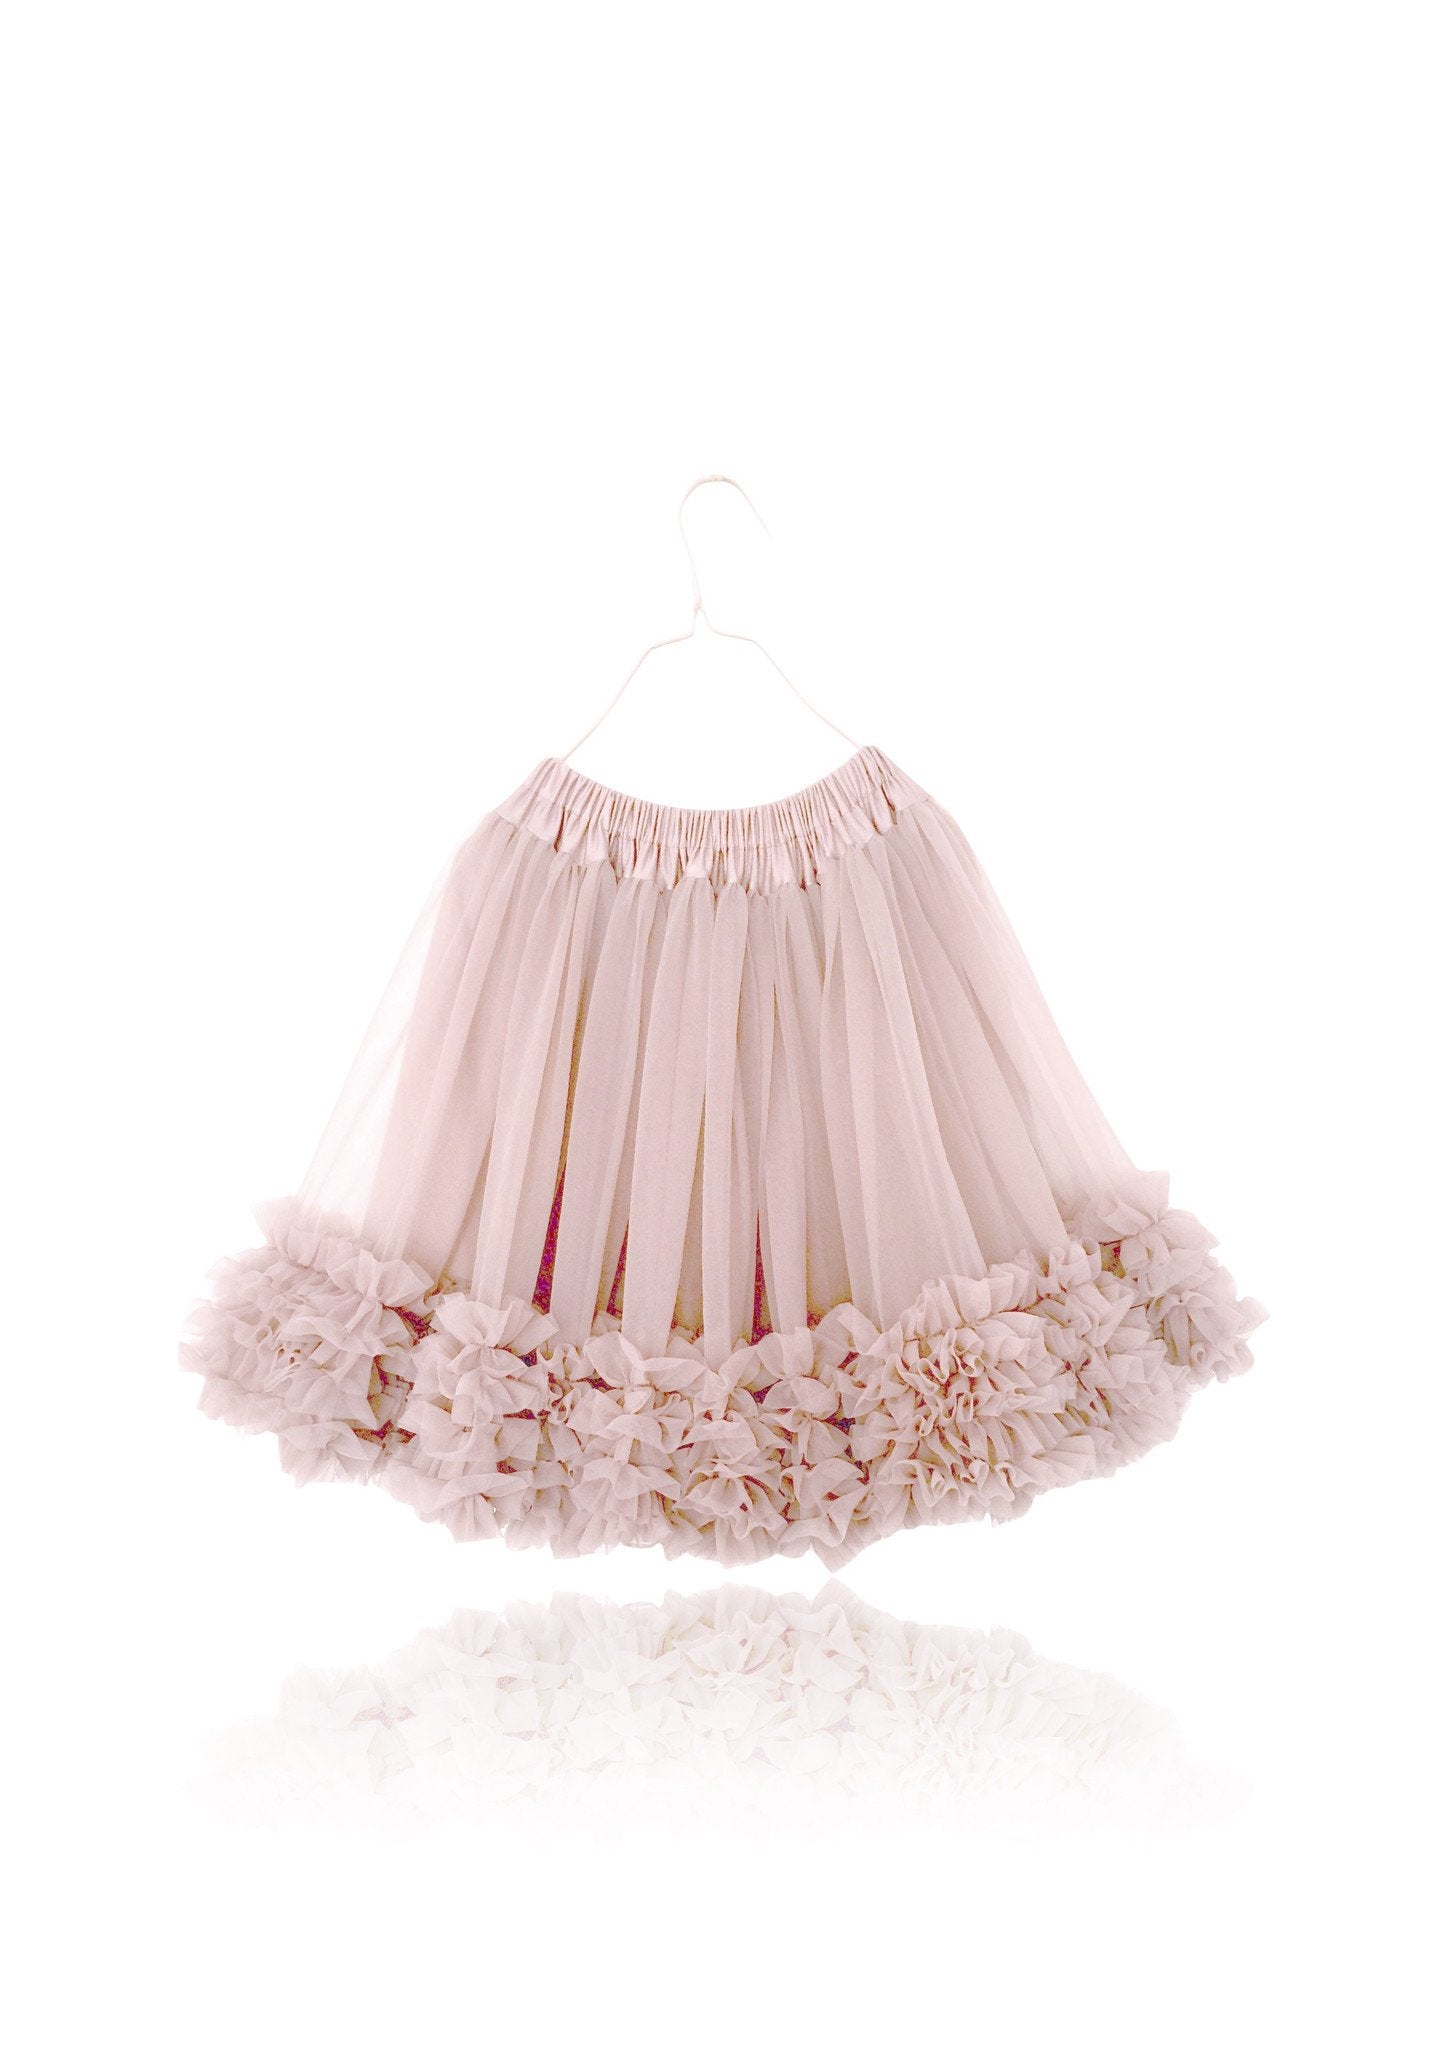 DOLLY by Le Petit Tom ® FRILLY SKIRT ballet pink - DOLLY by Le Petit Tom ®